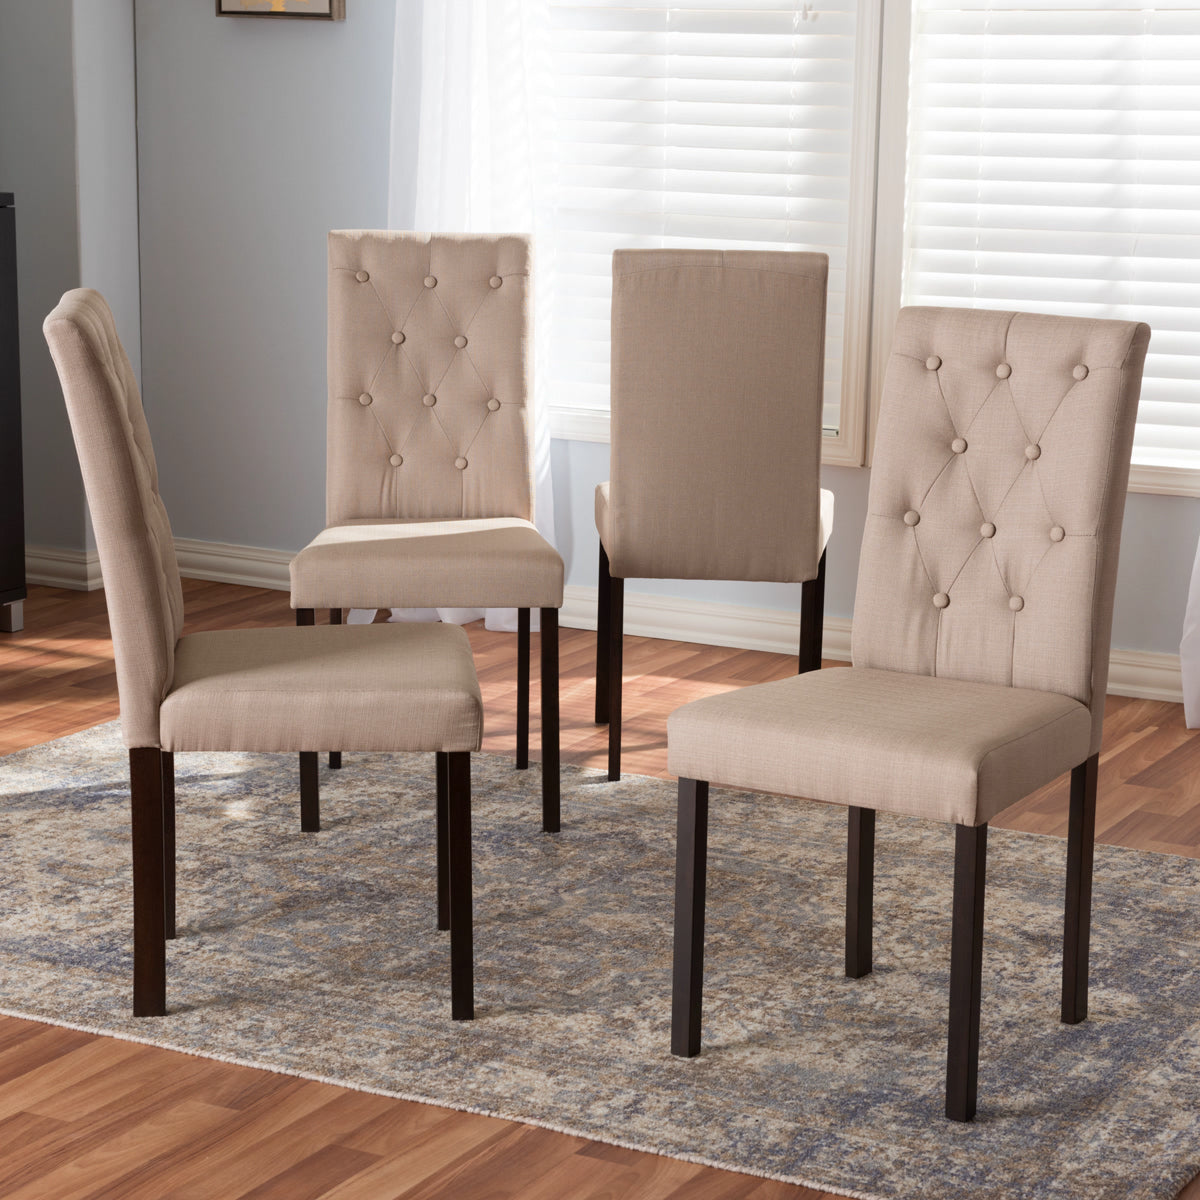 Baxton Studio Gardner Modern and Contemporary Dark Brown Finished Beige Fabric Upholstered Dining Chair (Set of 4) Baxton Studio-dining chair-Minimal And Modern - 1